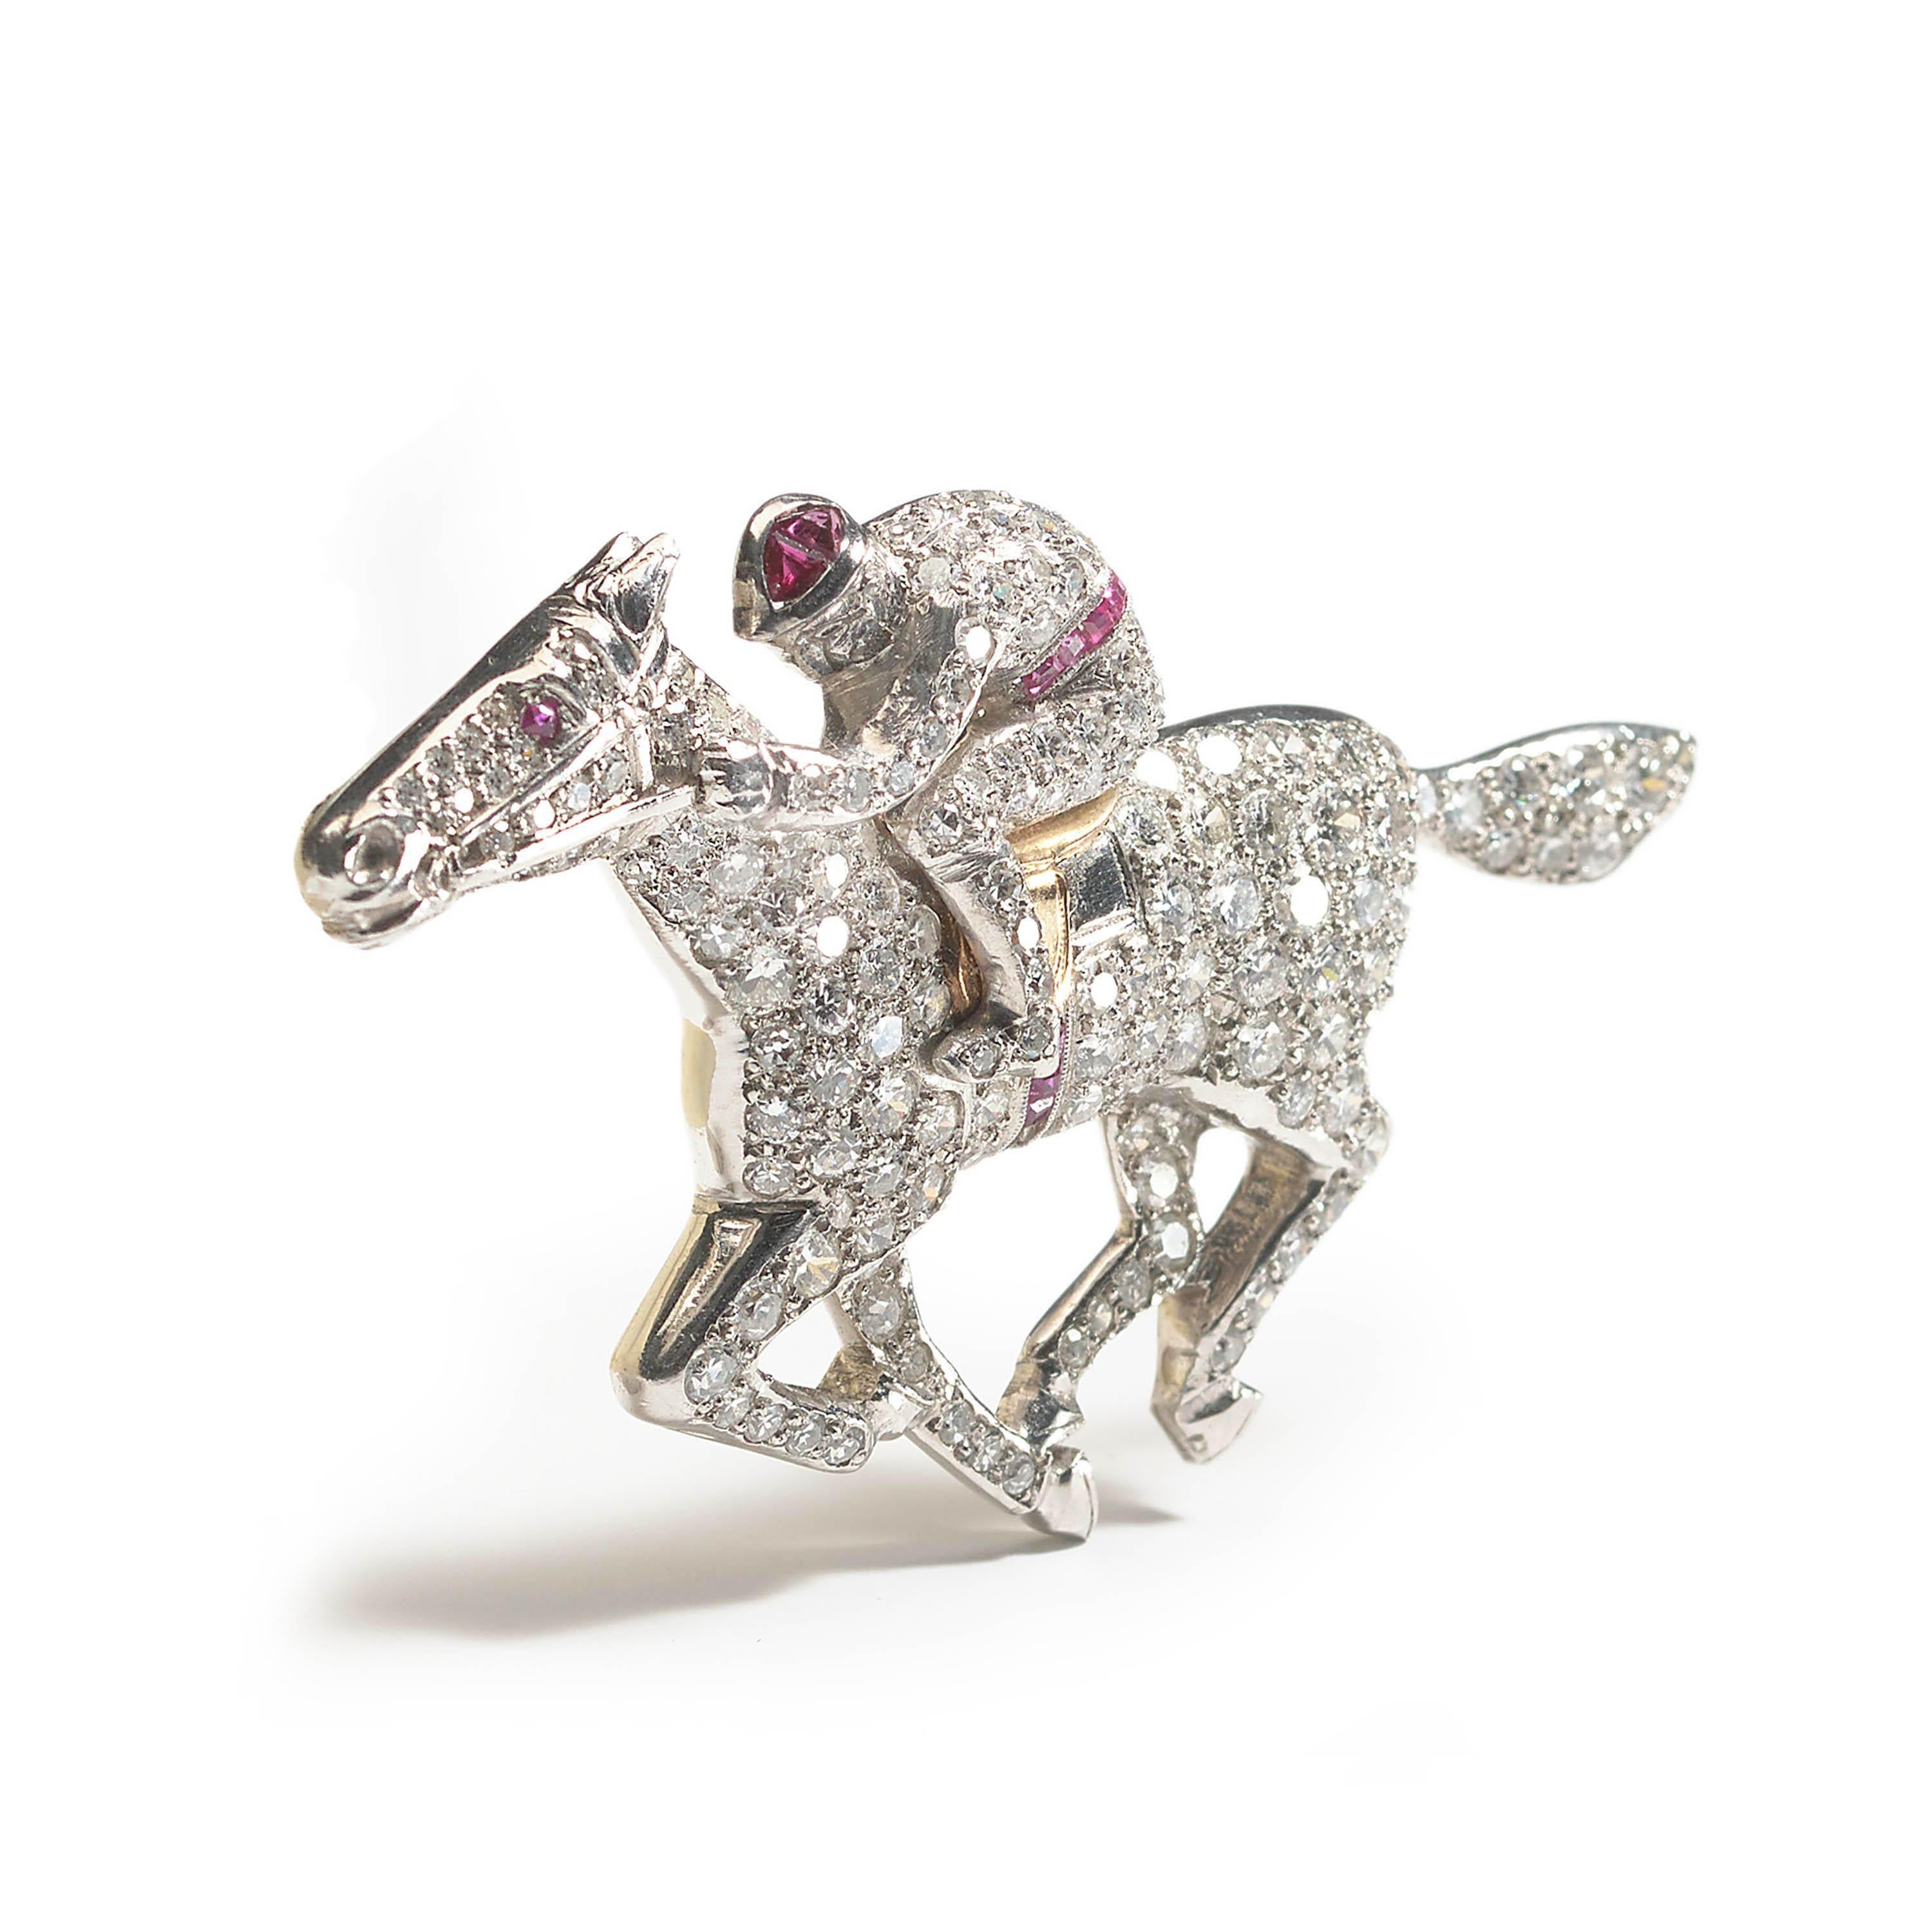 A vintage horse and jockey brooch, pavé set with eight-cut, old-cut and round brilliant-cut diamonds and calibré-cut rubies in the horse's saddle girth, the jockey's cap and belt and a round ruby in the eye, mounted in platinum, with a gold saddle,